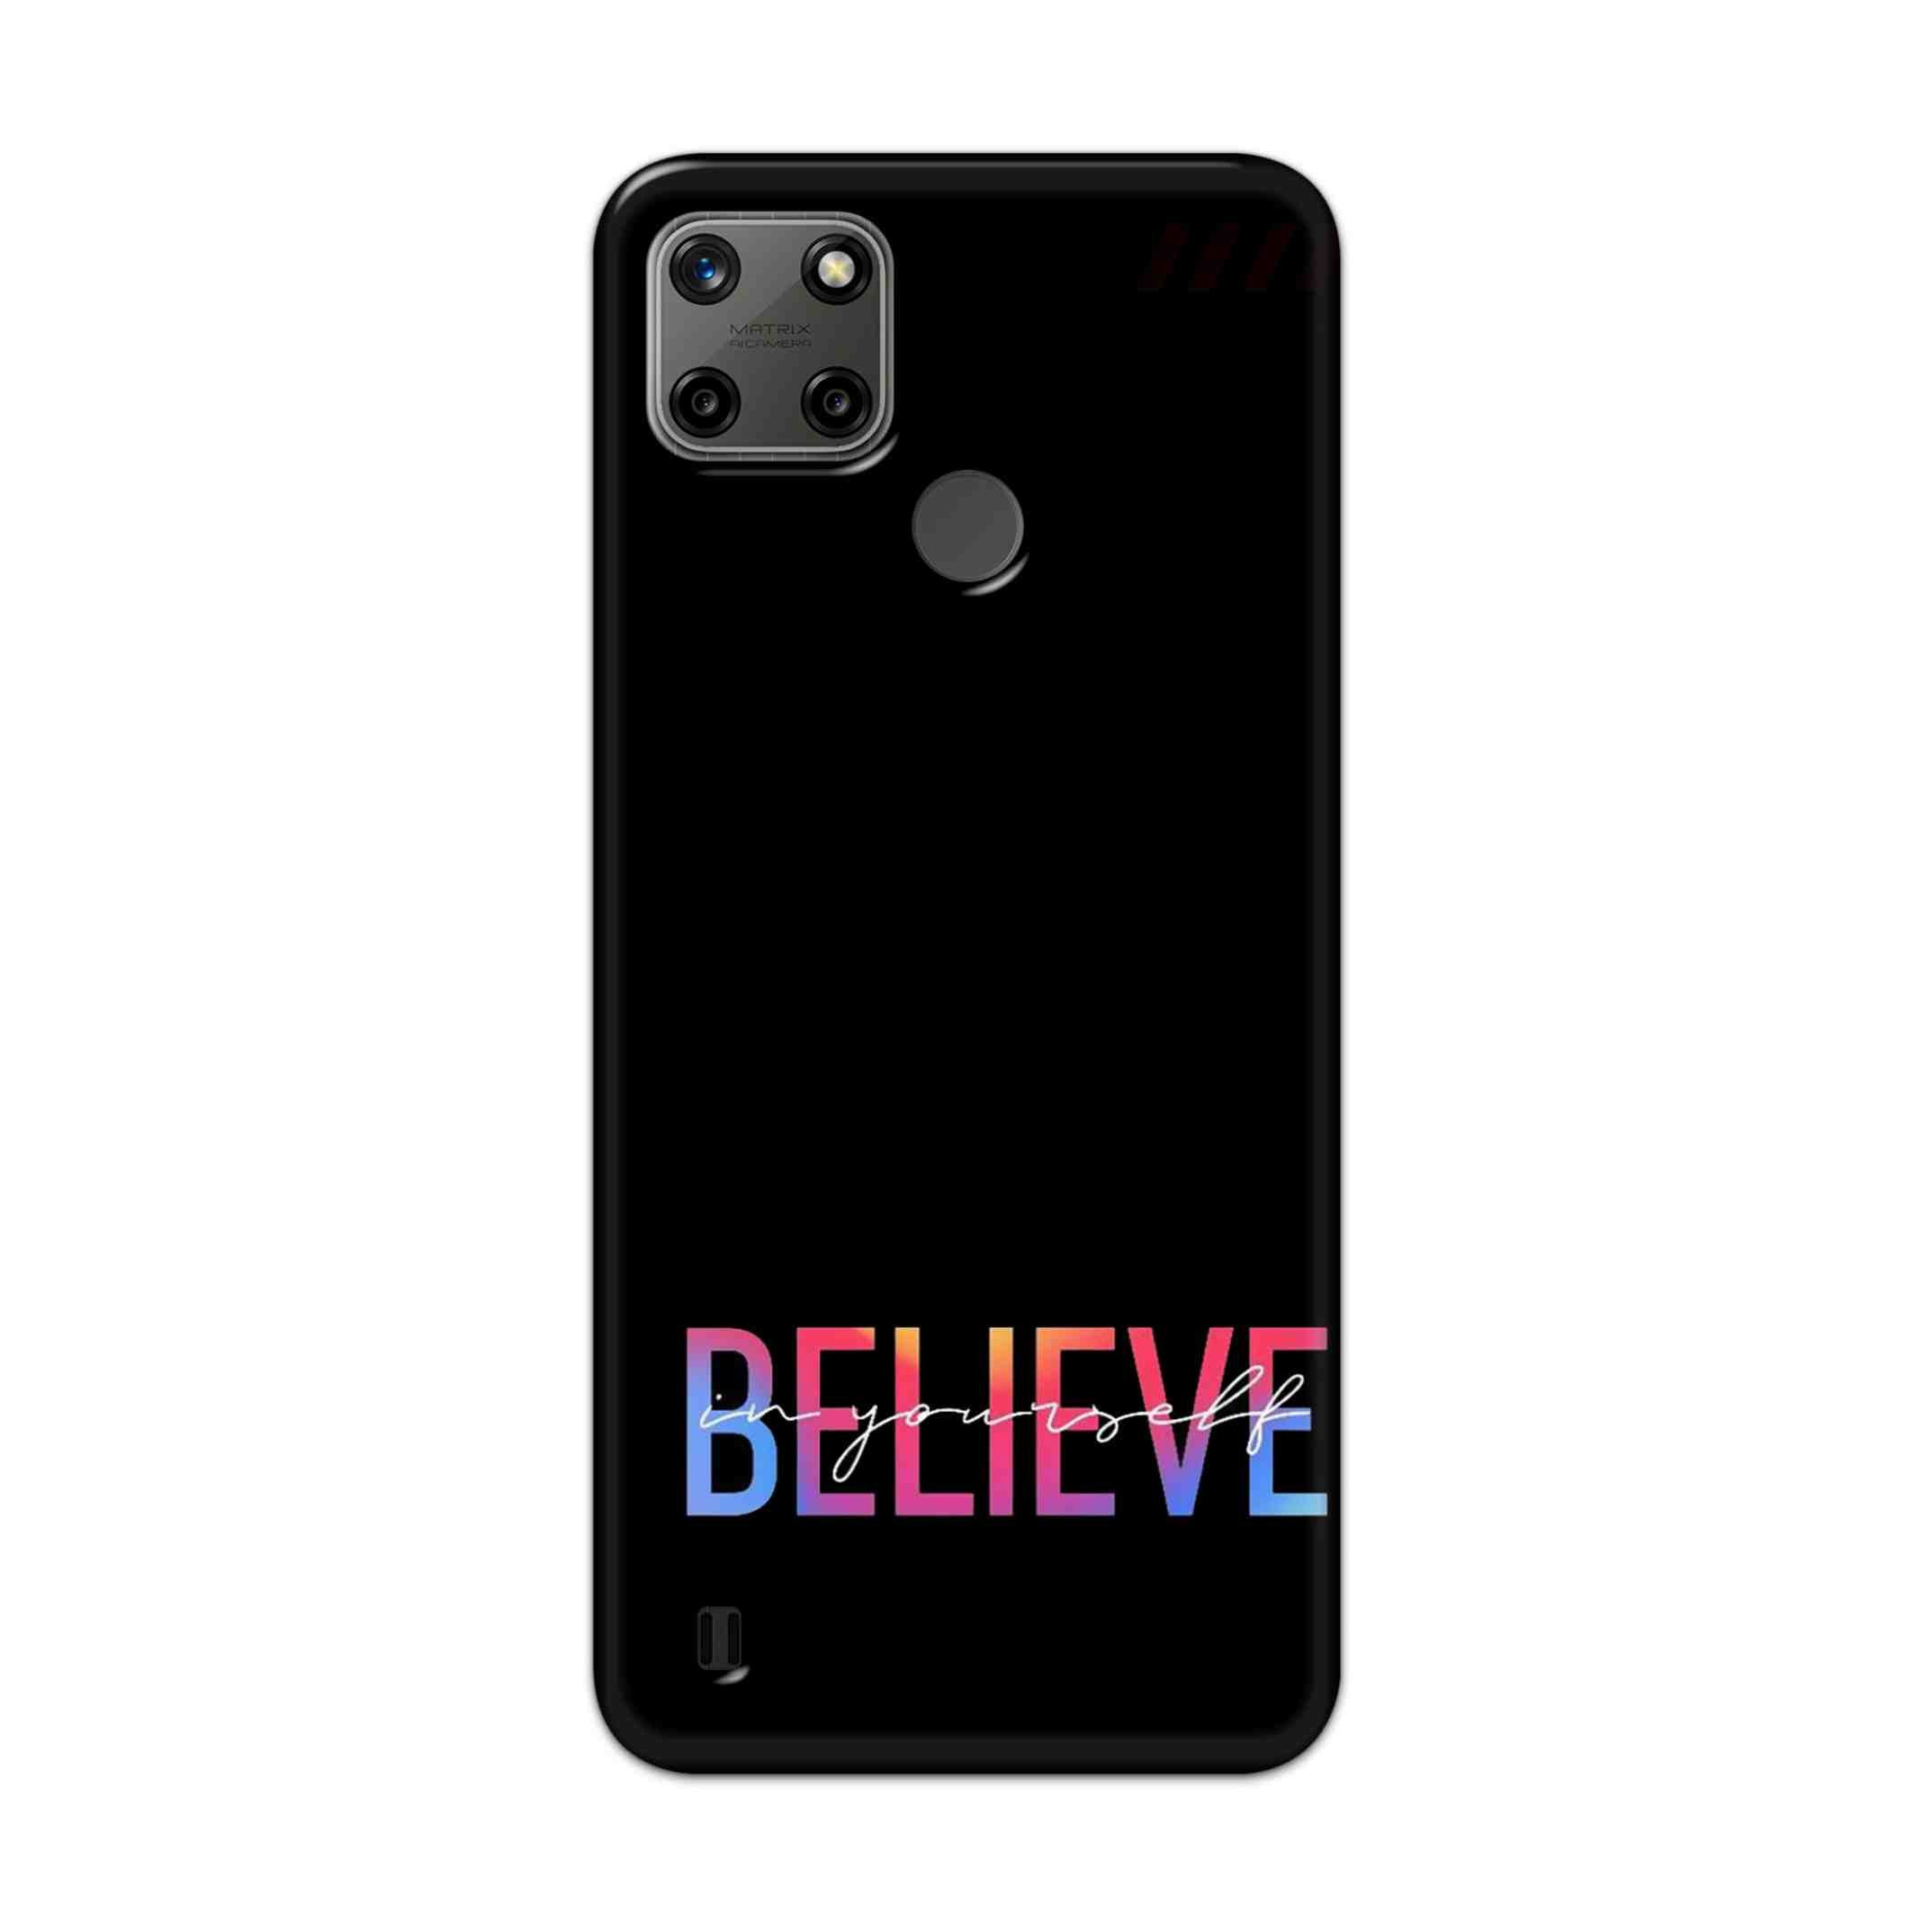 Buy Believe Hard Back Mobile Phone Case Cover For Realme C25Y Online